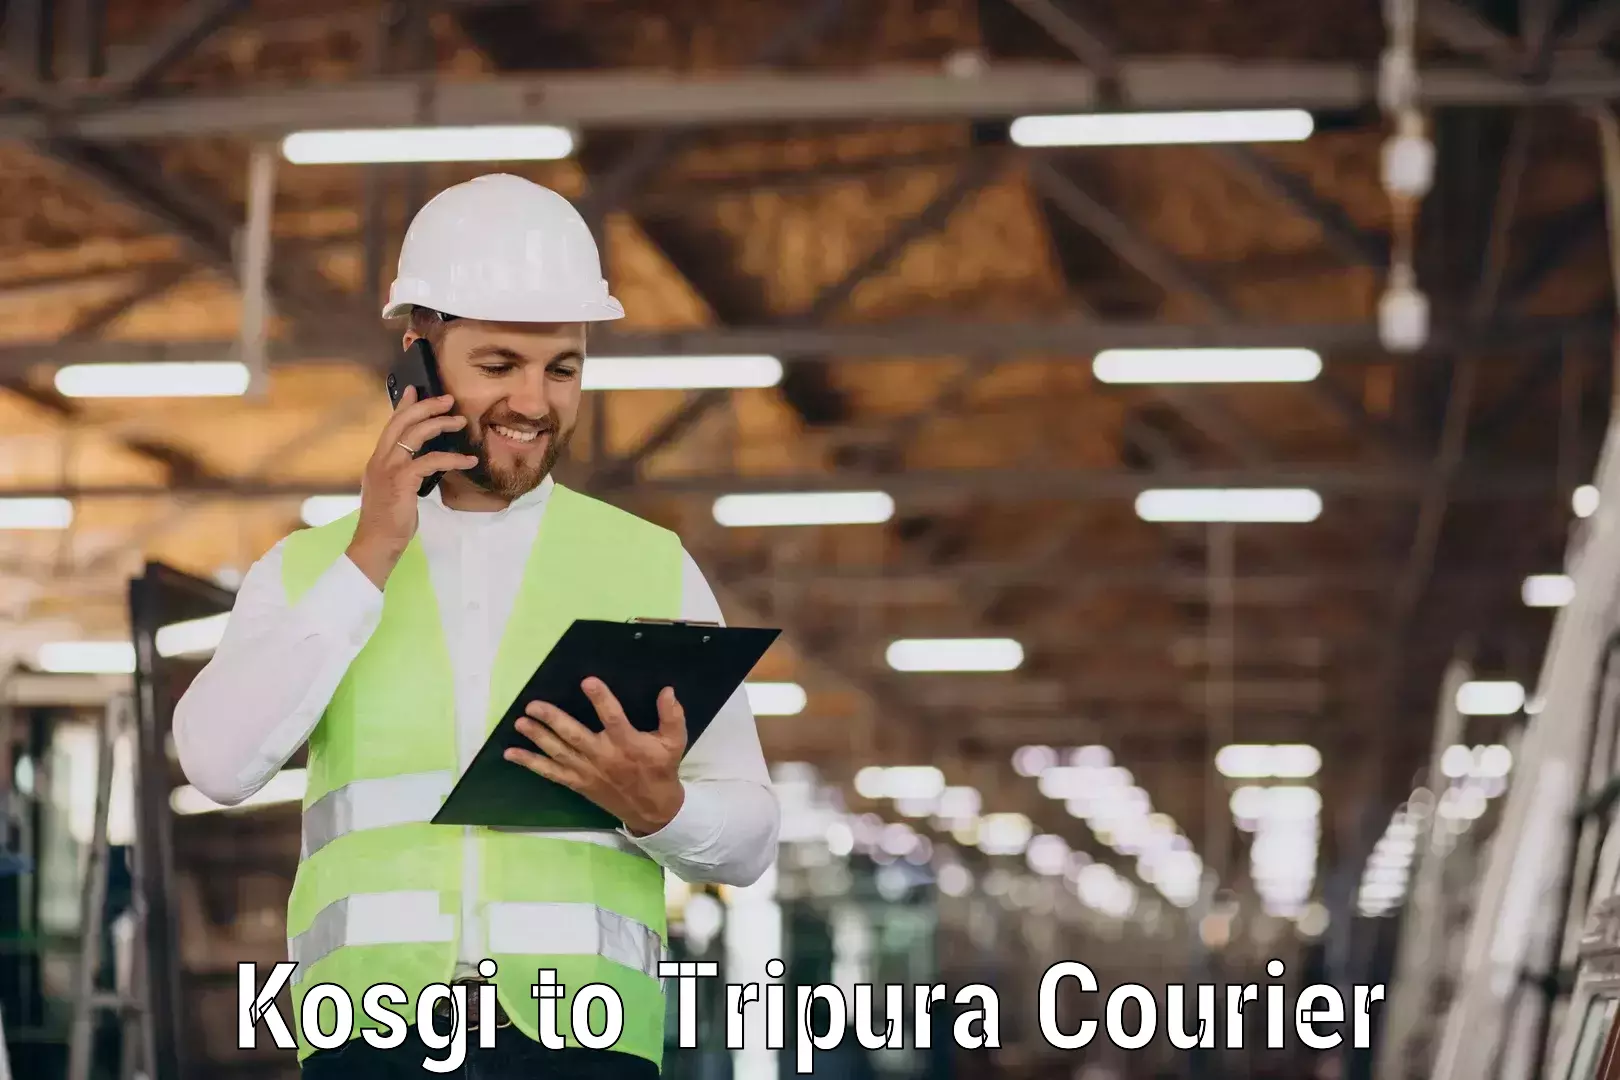 Easy access courier services Kosgi to North Tripura